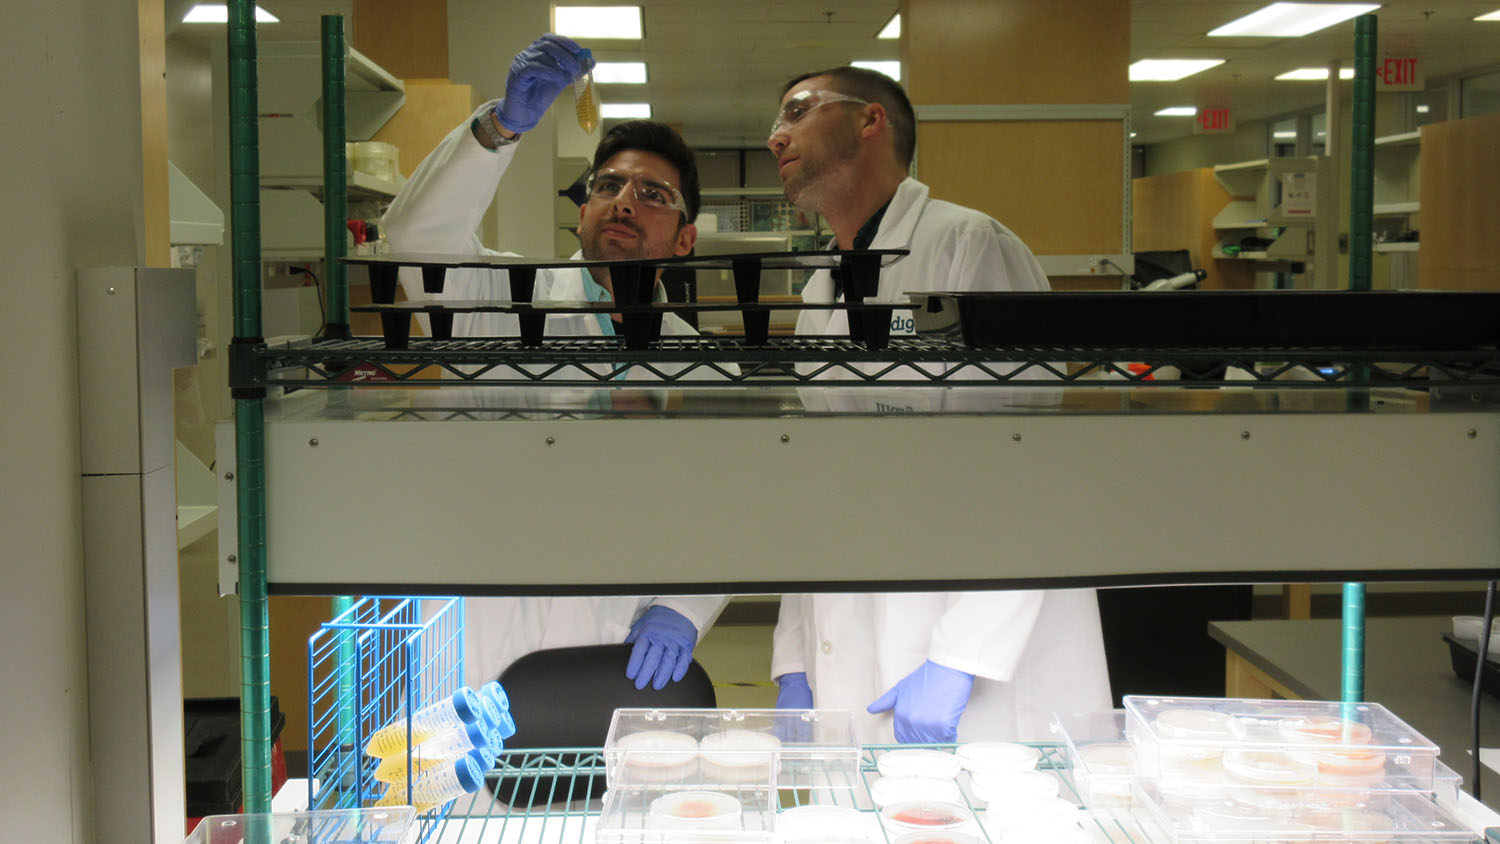 MMB student working in a lab during his internship